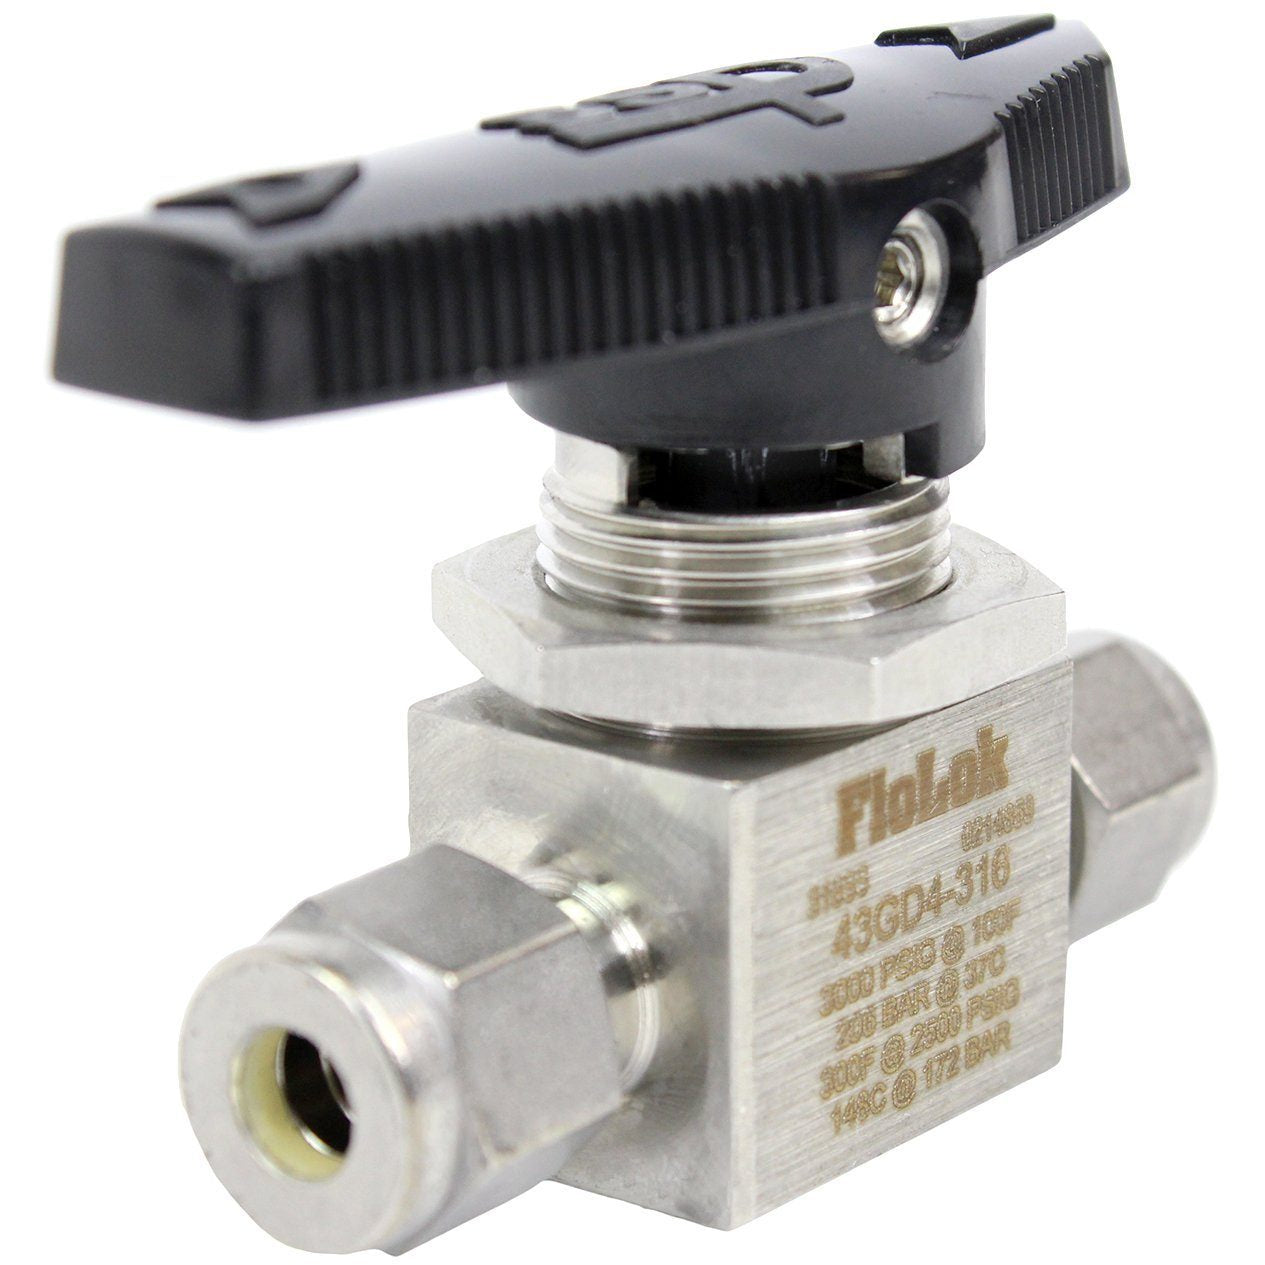 SSP - 2 Way Ball Valve - Fractional Tube Fitting Shop All Categories SSP Corporation 